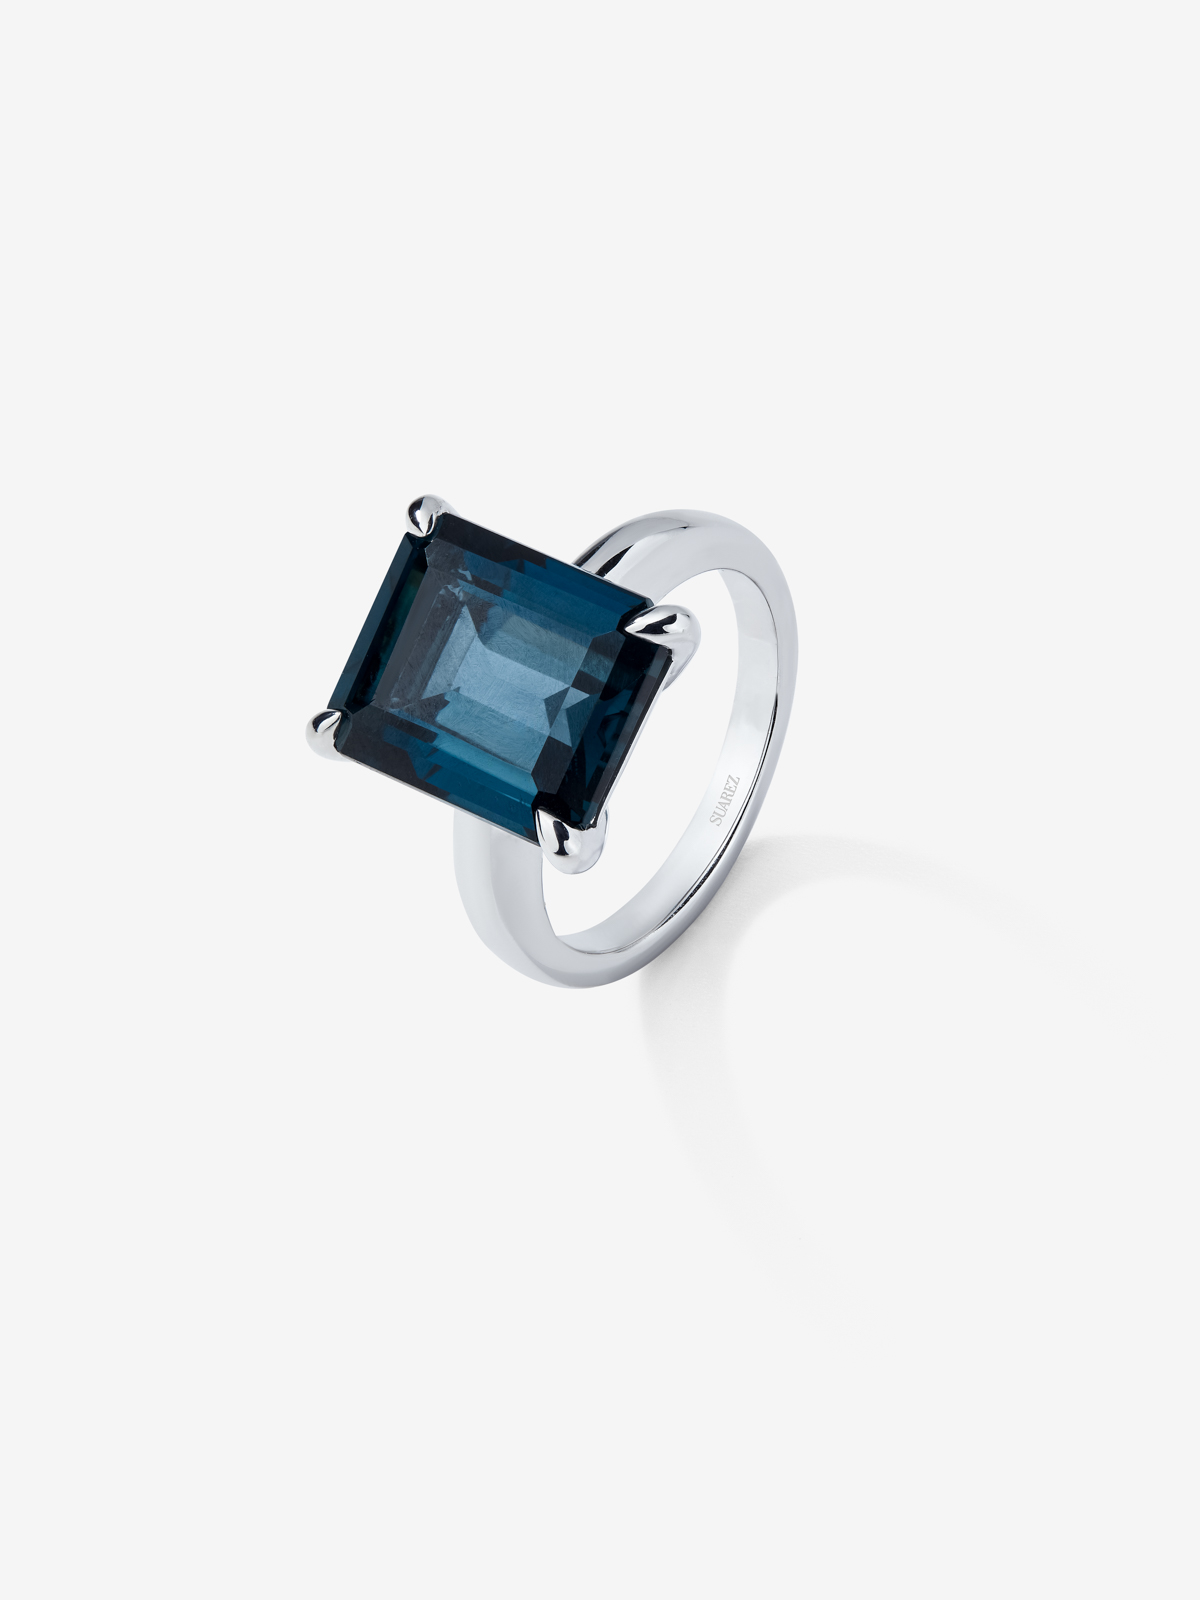 Silver ring with London blue topaz stone